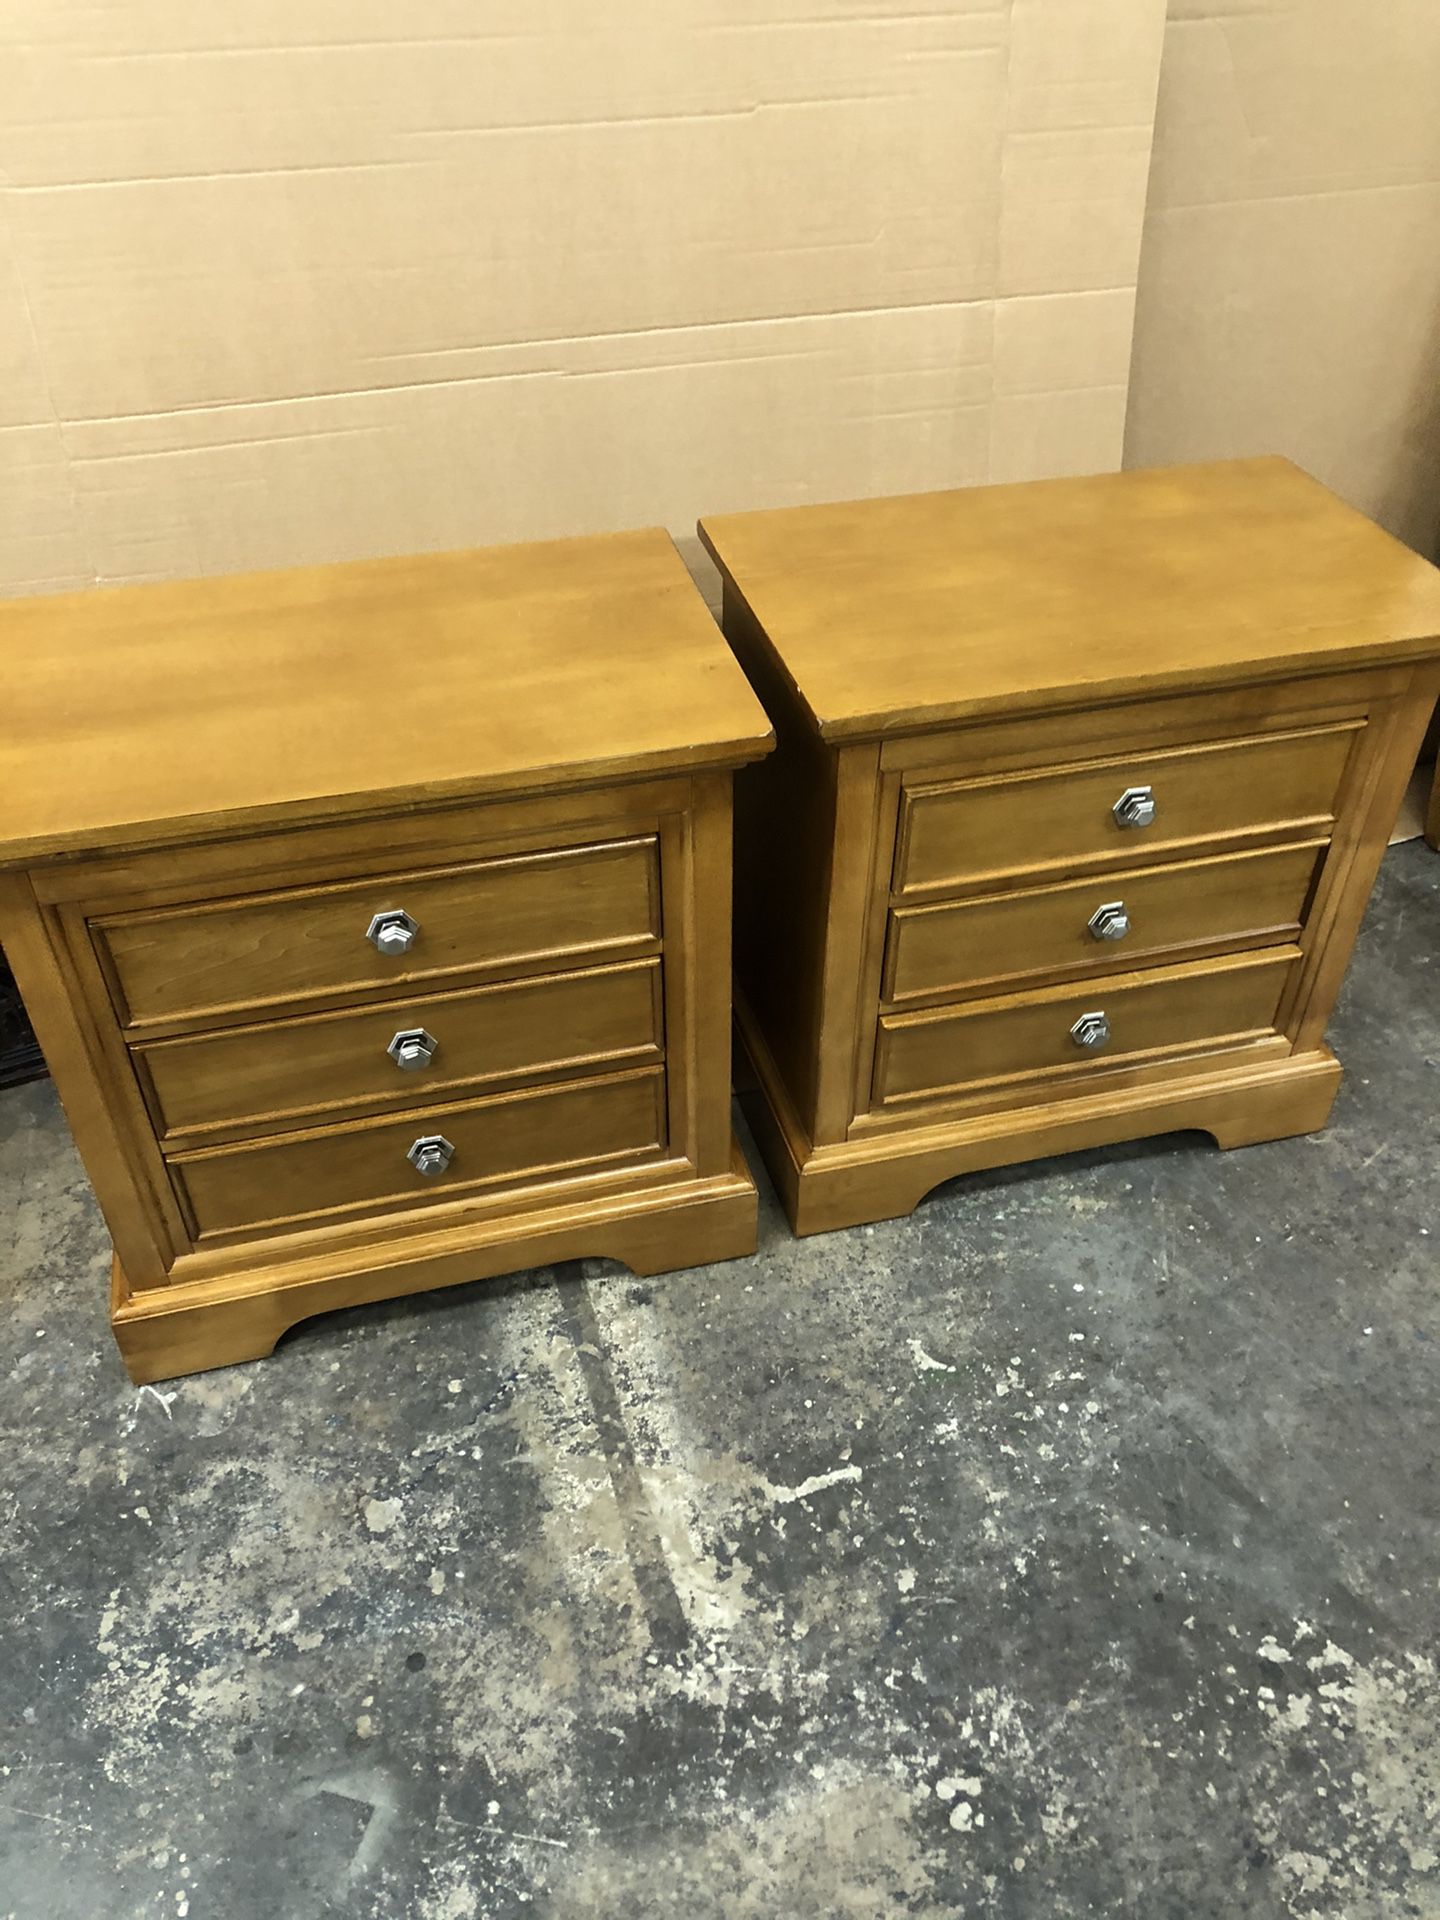 2 matching Solid Wood Nightstands end tables